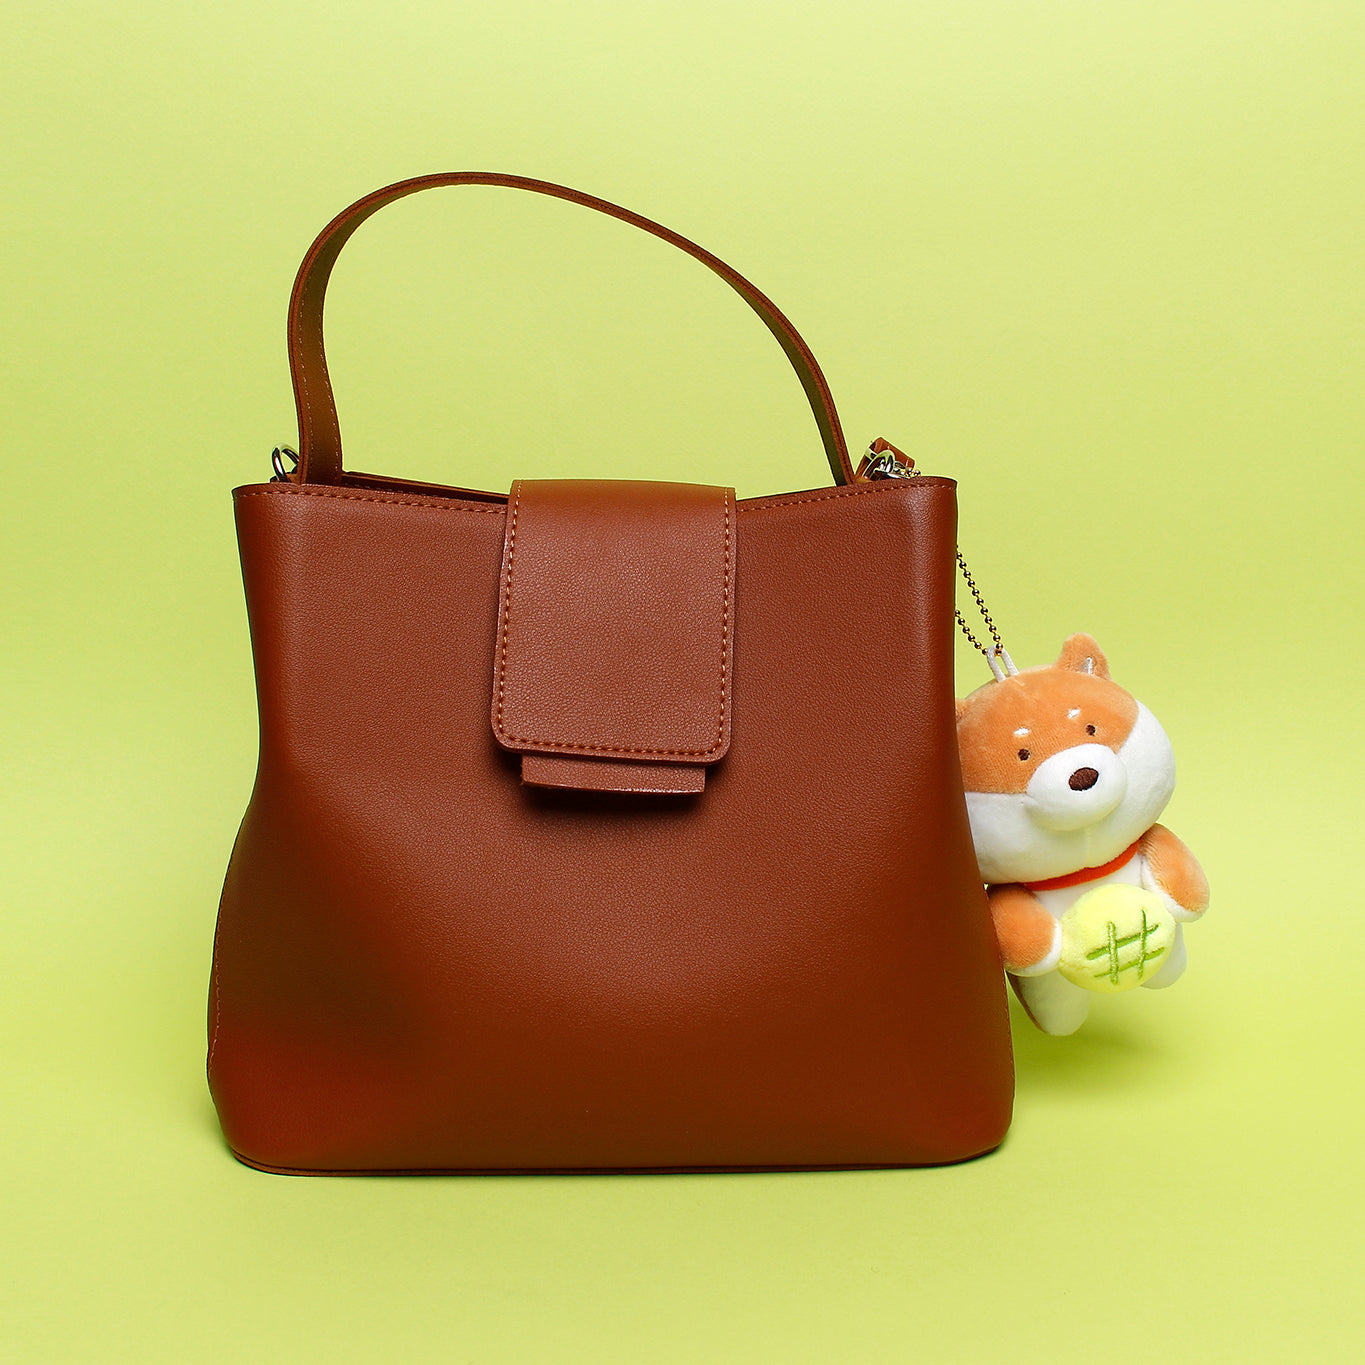 Tan shiba with green roll keyring plush attached to brown purse on lime green background.